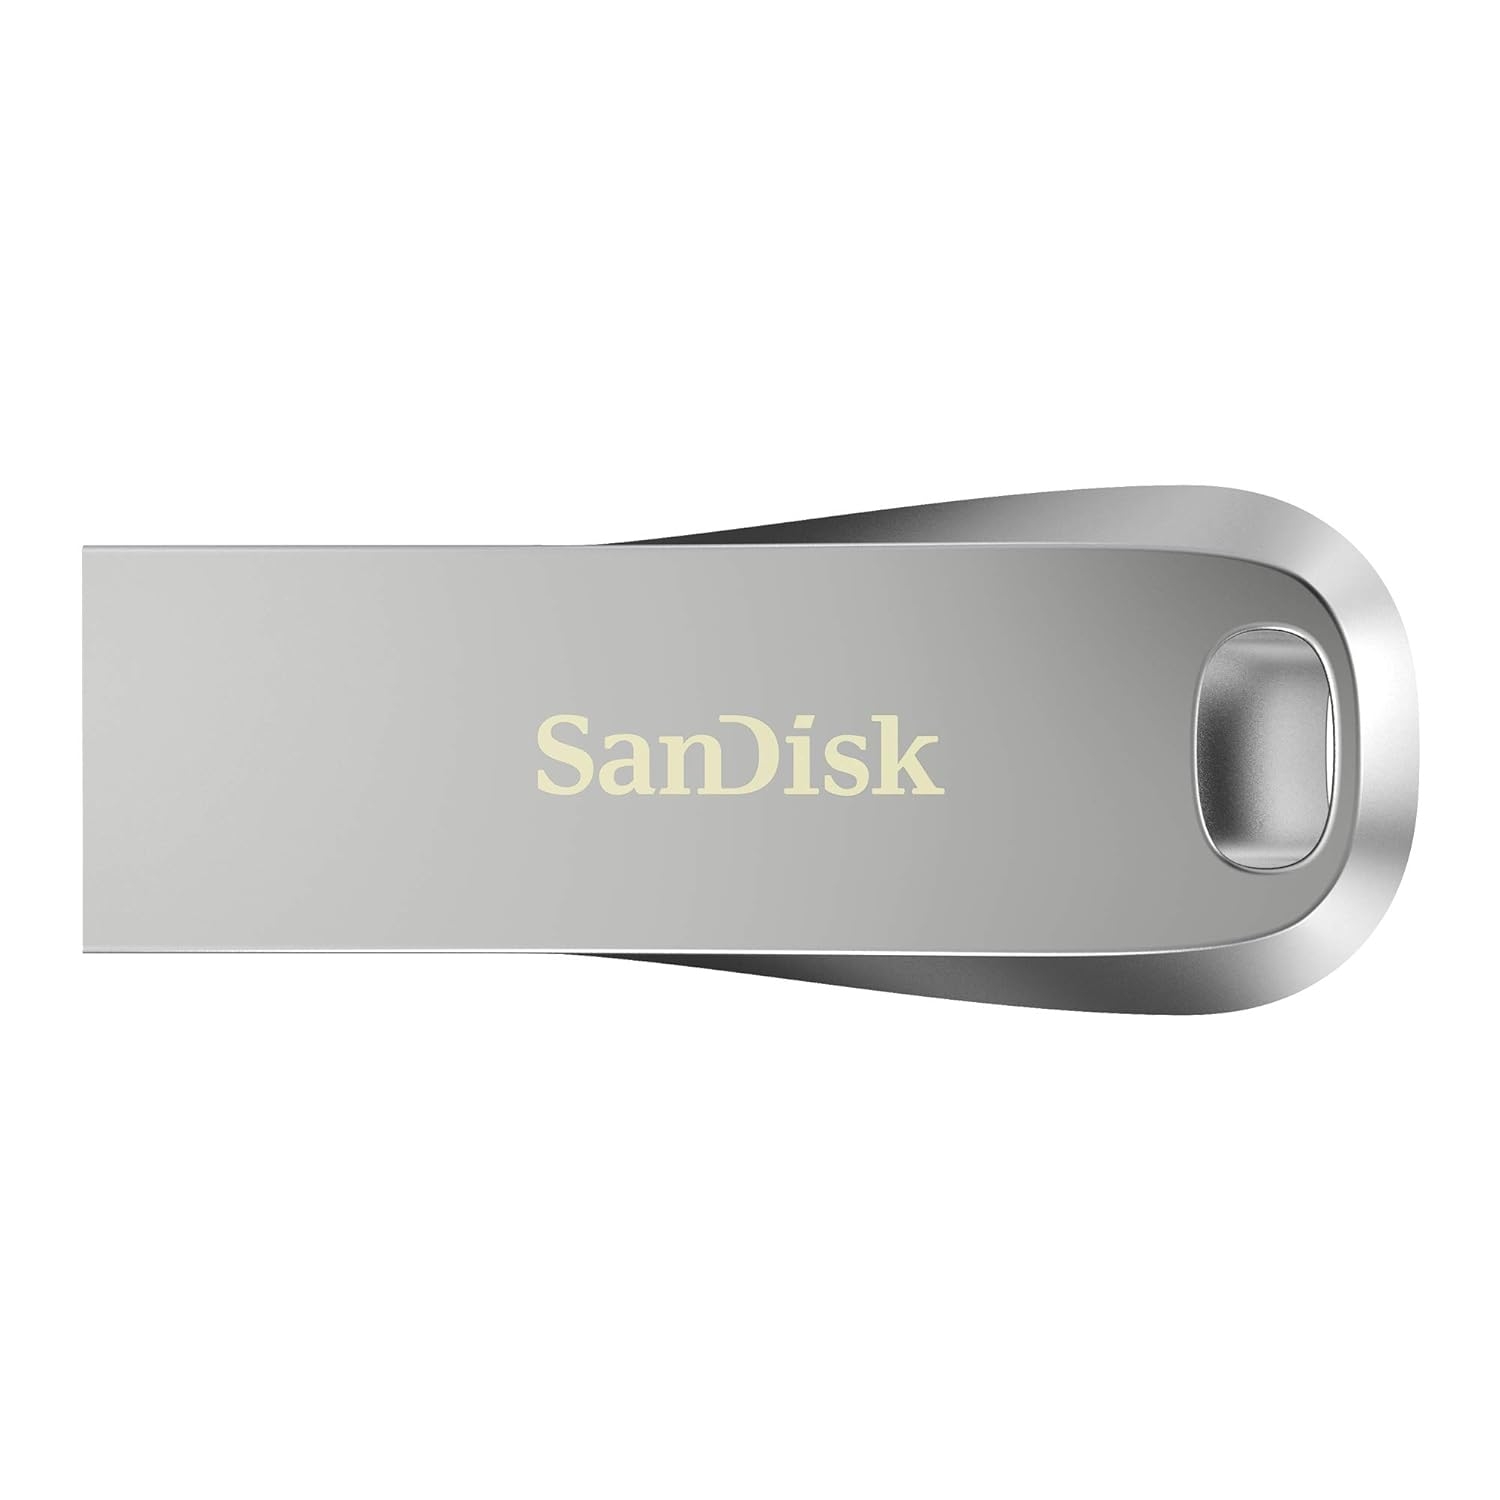 SanDisk Ultra Luxe USB 3.1 Flash Drive 512GB, Upto 400MB/s, All Metal